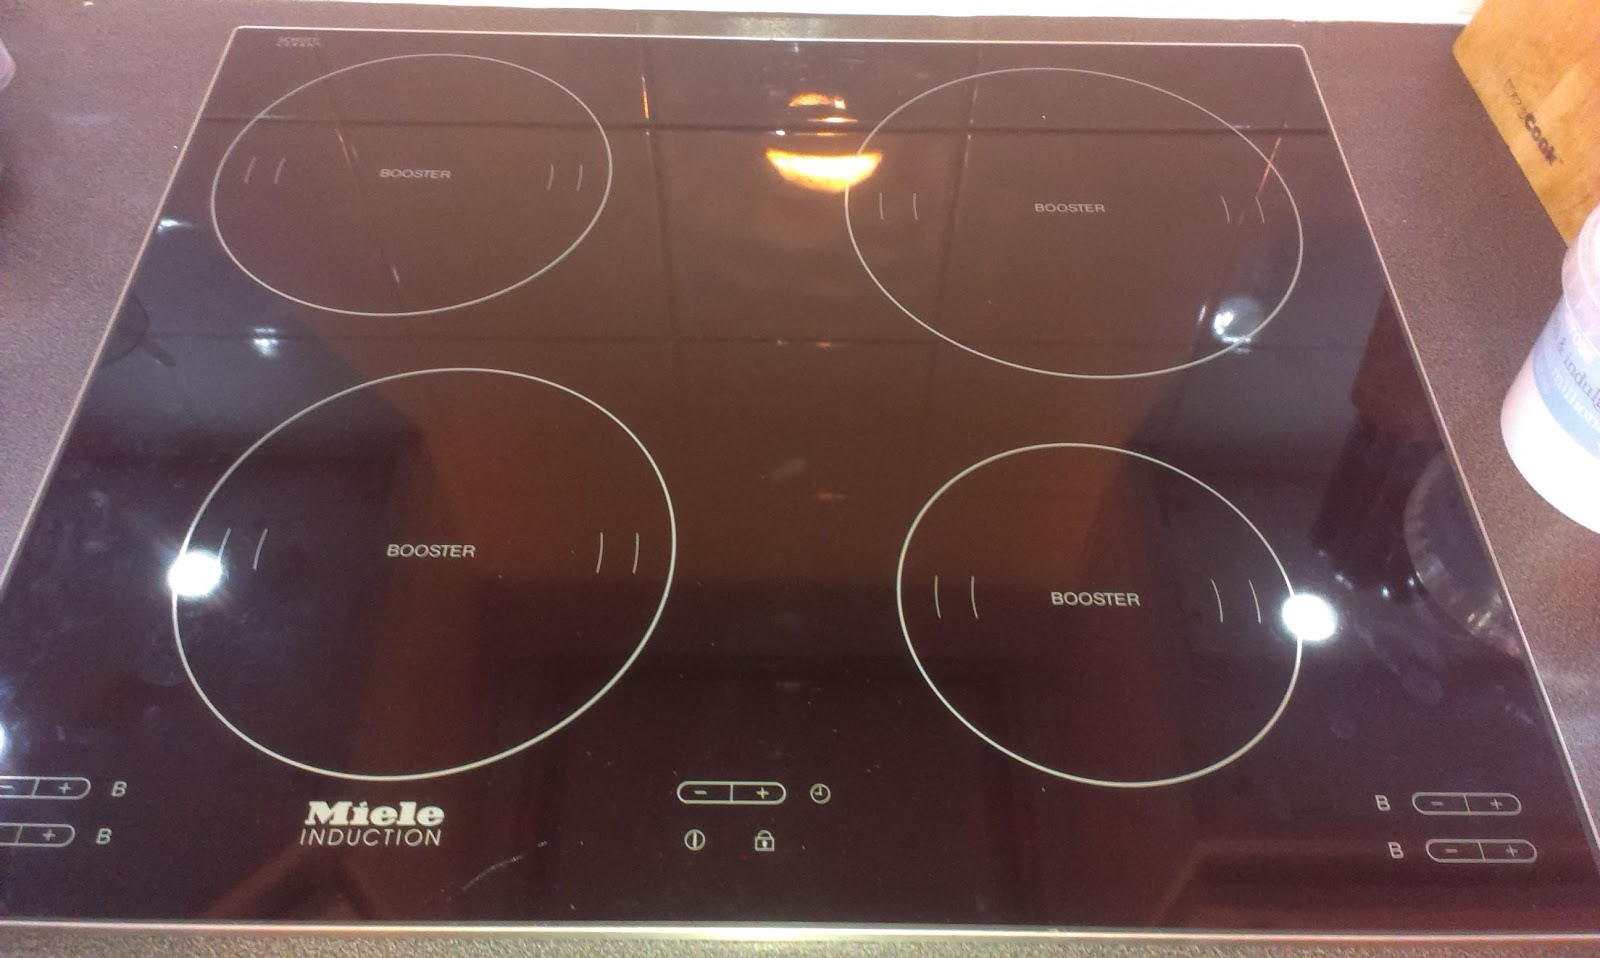 whatt nean E4 ,its display after some time when i try use my whirlpool indu...